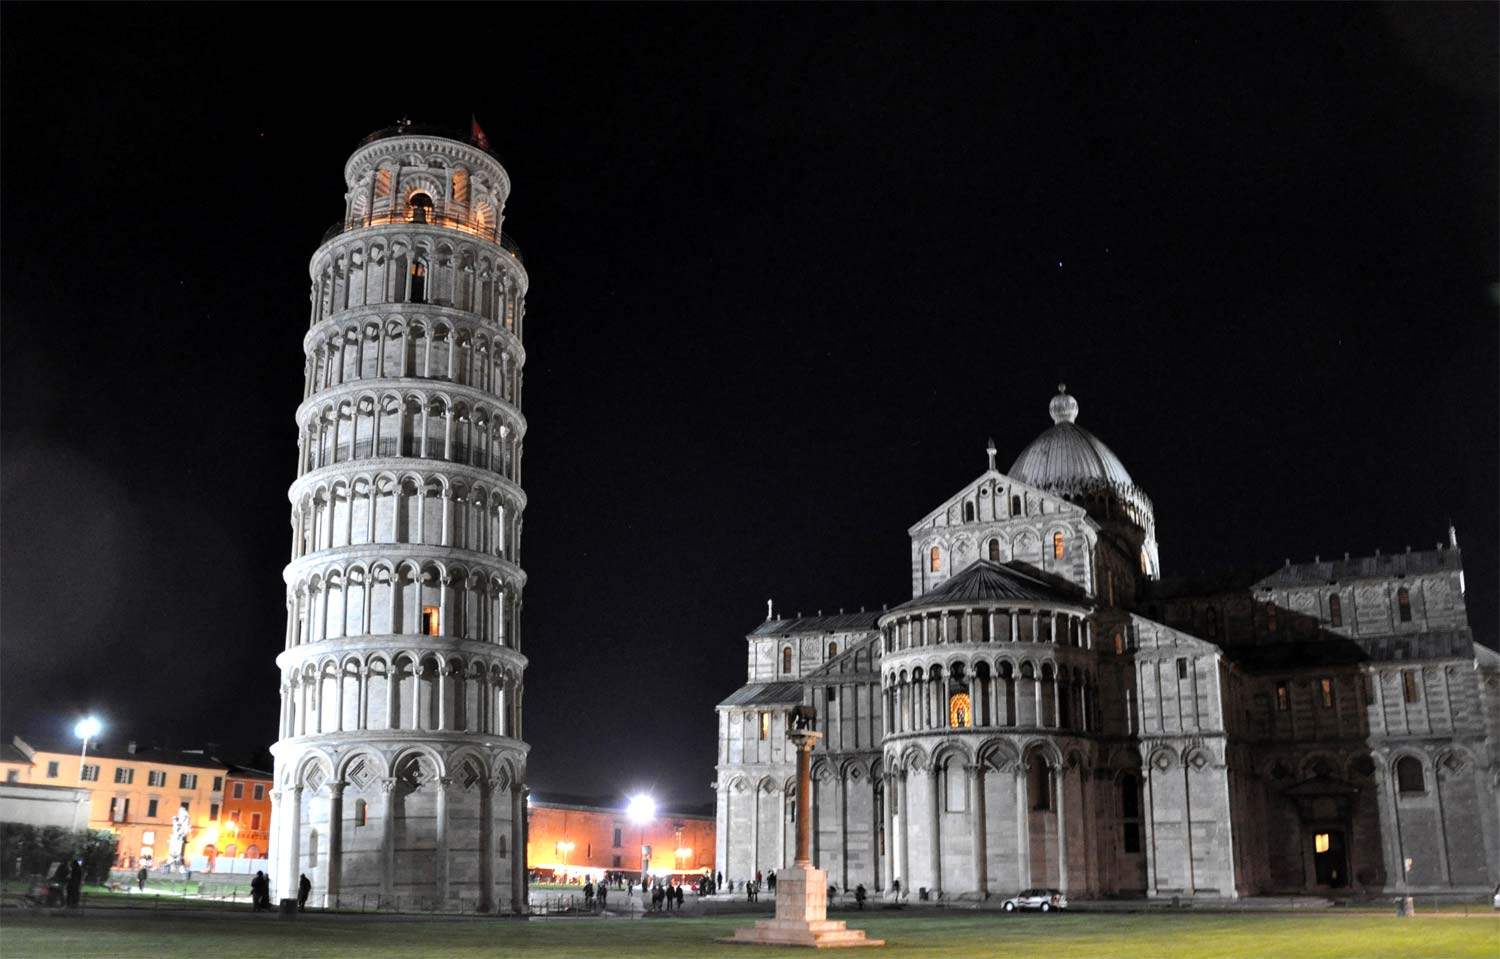 How is the Tower of Pisa? After 850 years, its condition is excellent